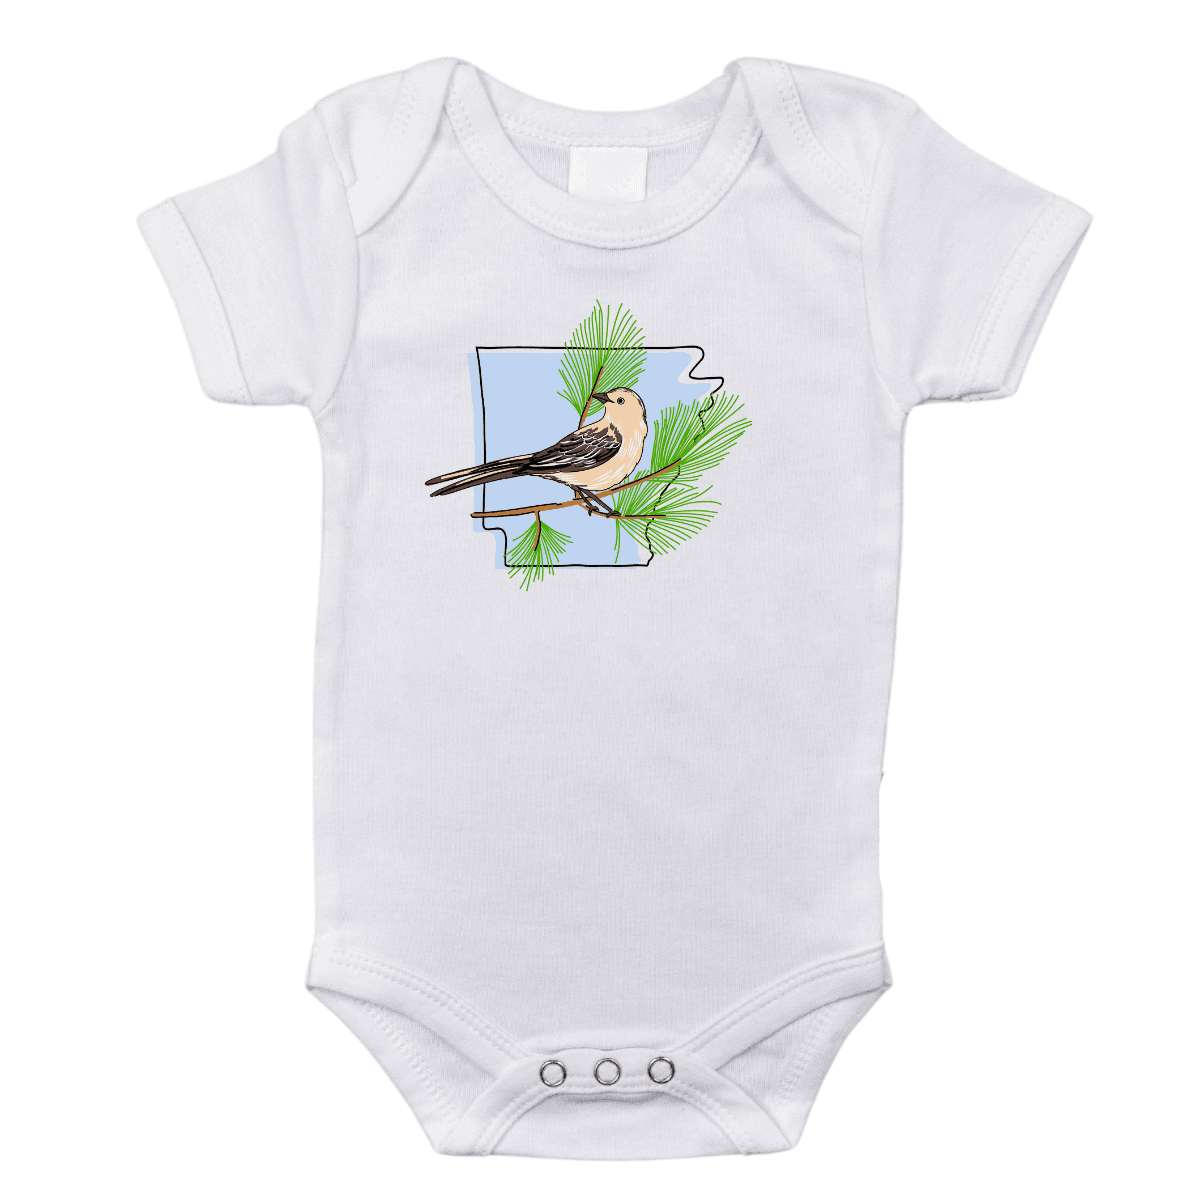 White baby onesie with "Arkansas Pine" in green and a pine tree graphic, evoking a rustic, natural feel.